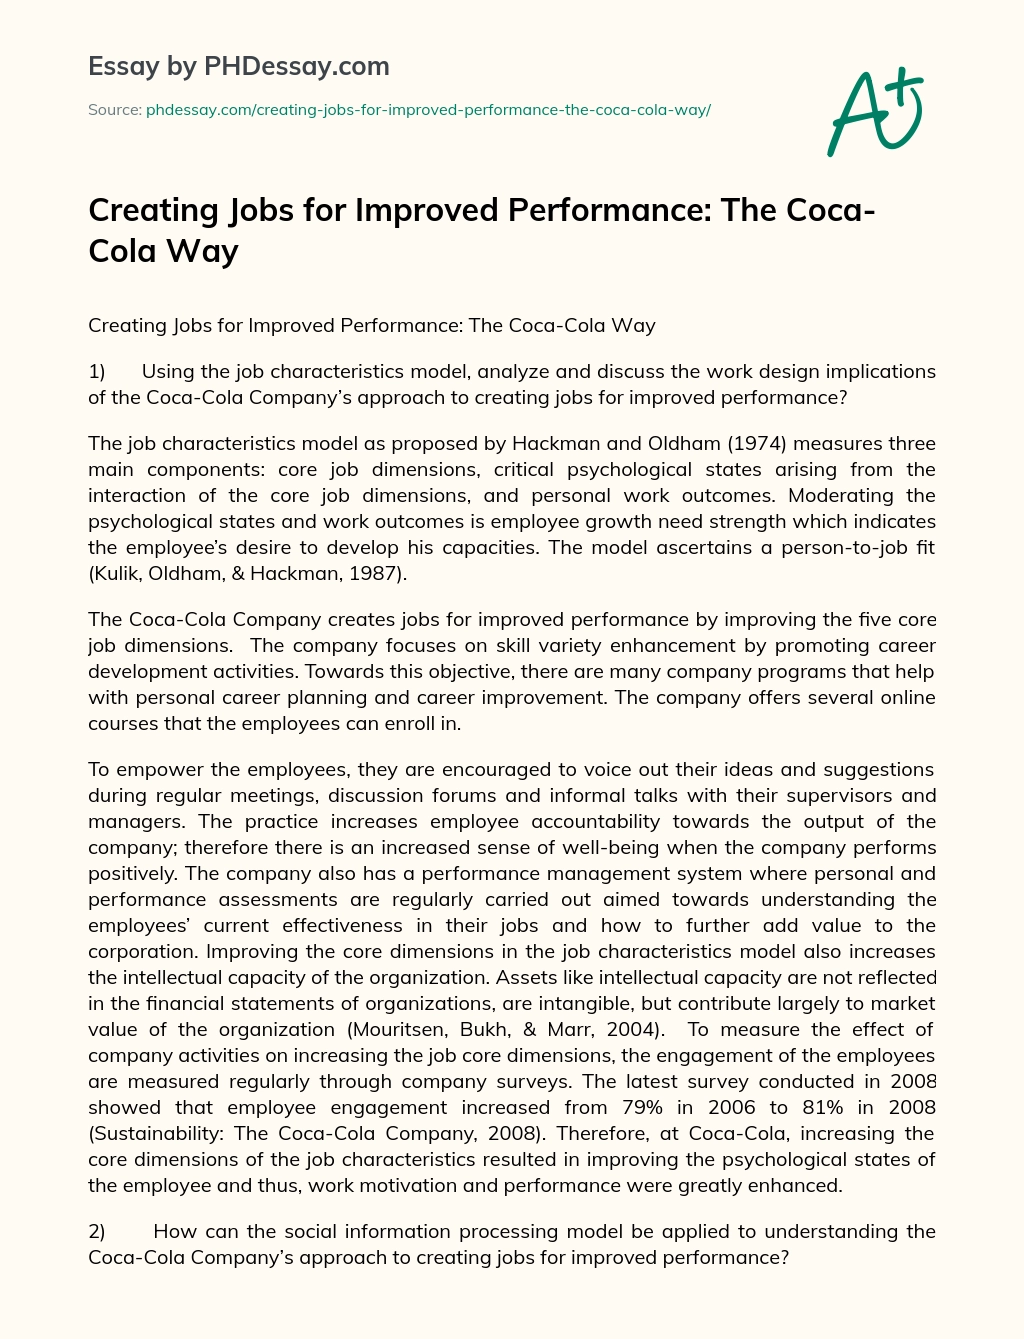 Creating Jobs for Improved Performance: The Coca-Cola Way essay